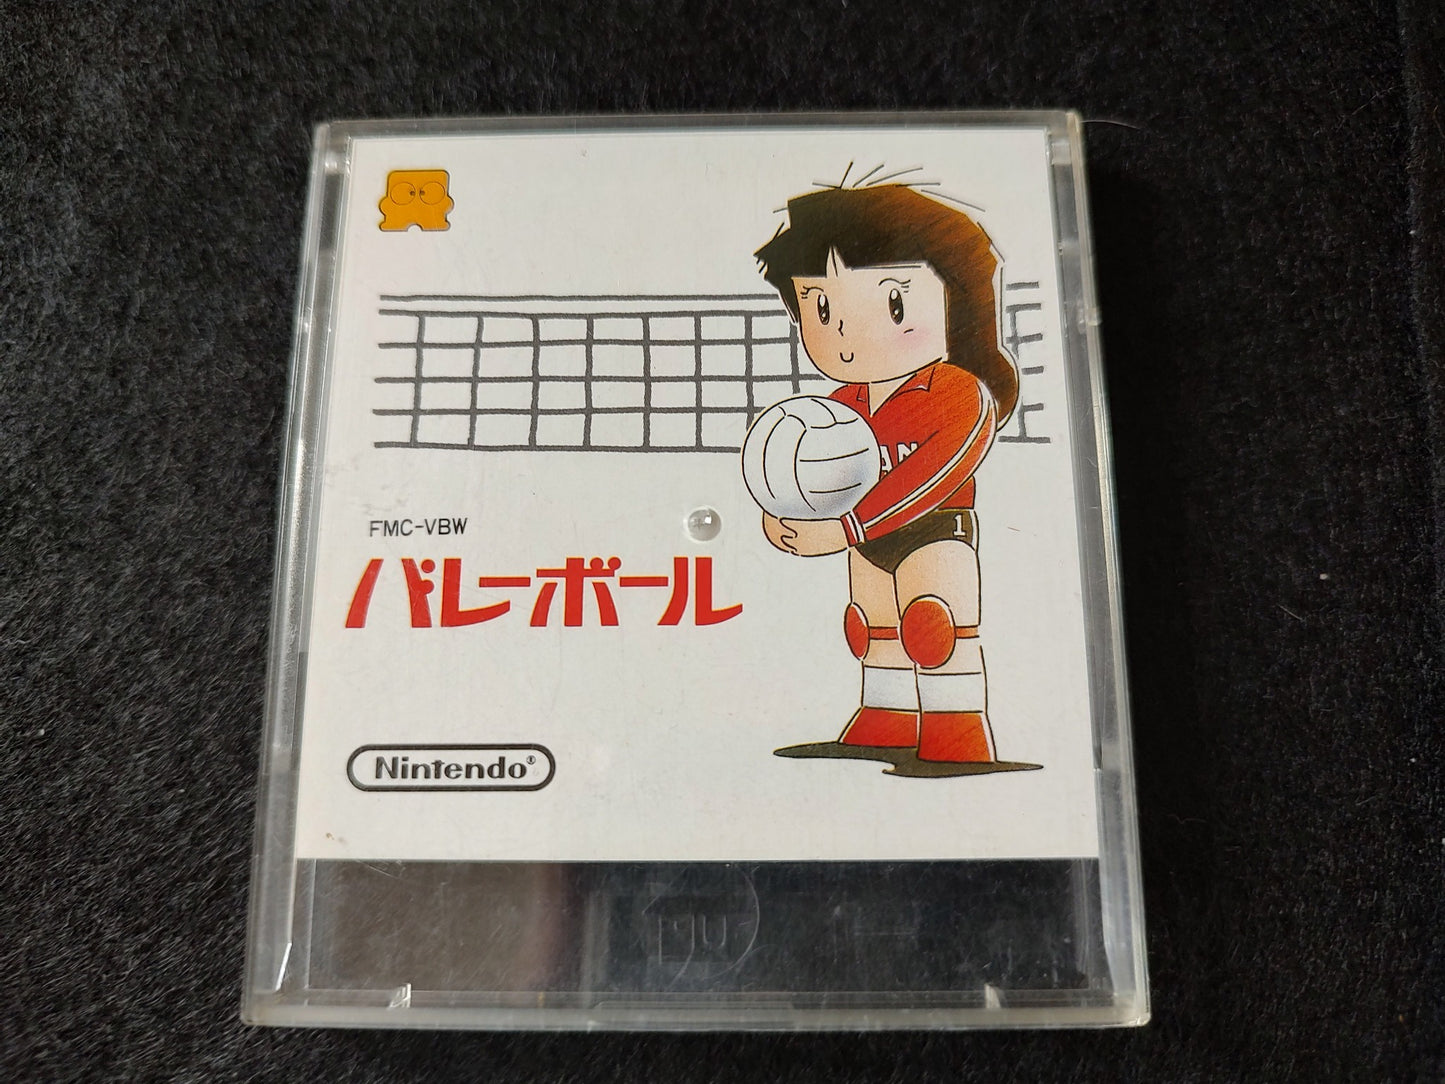 Volley ball / Super Mario Brothers 2 FAMICOM DISK SYSTEM/Disk and Case-f0706-